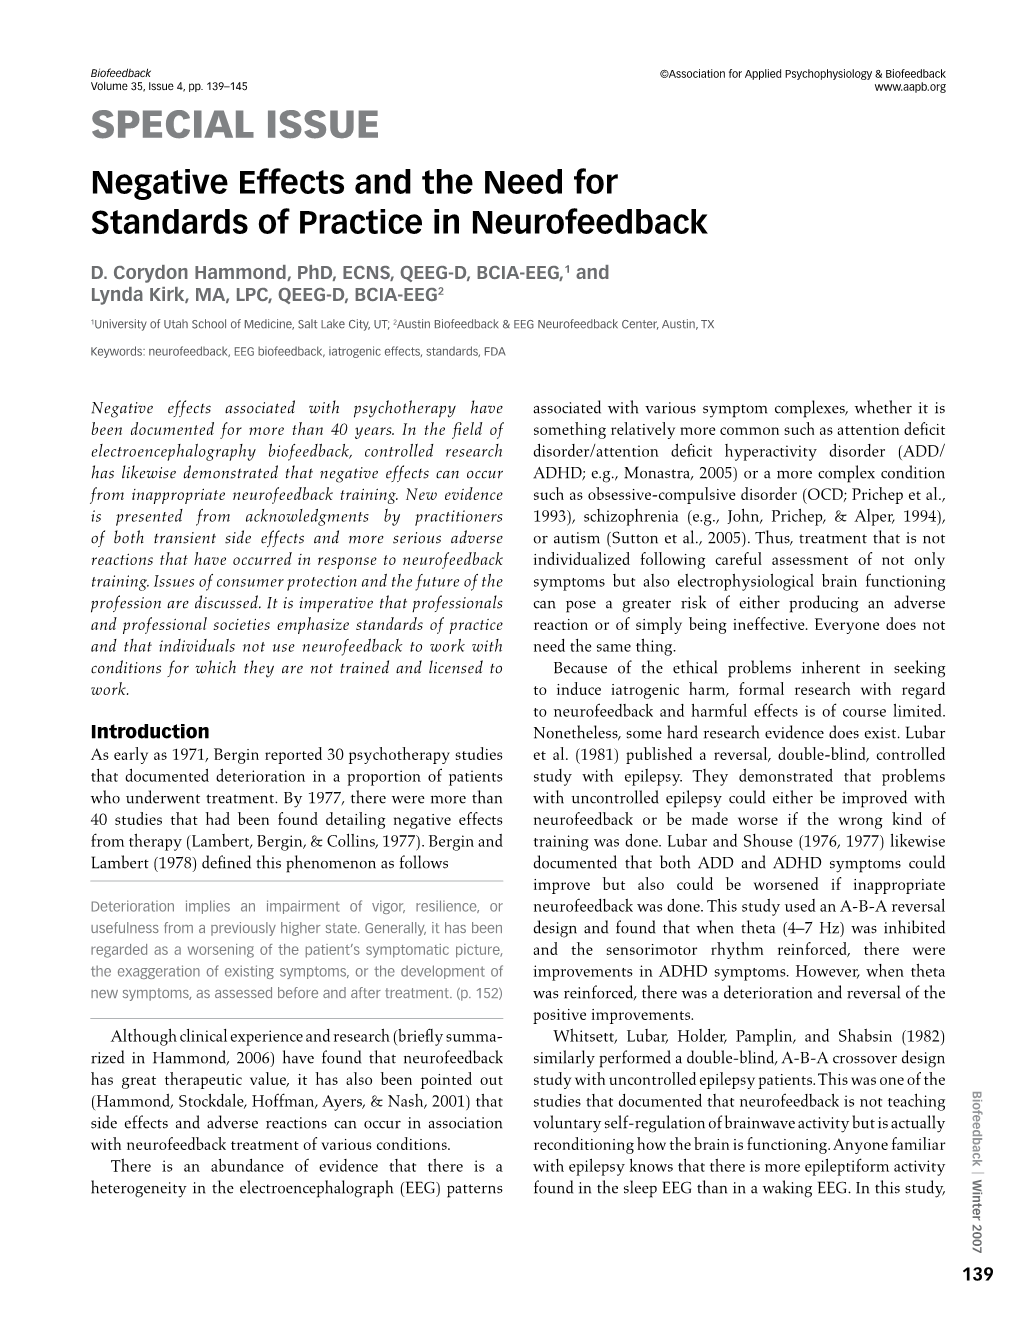 Negative Effects and the Need for Standards of Practice in Neurofeedback